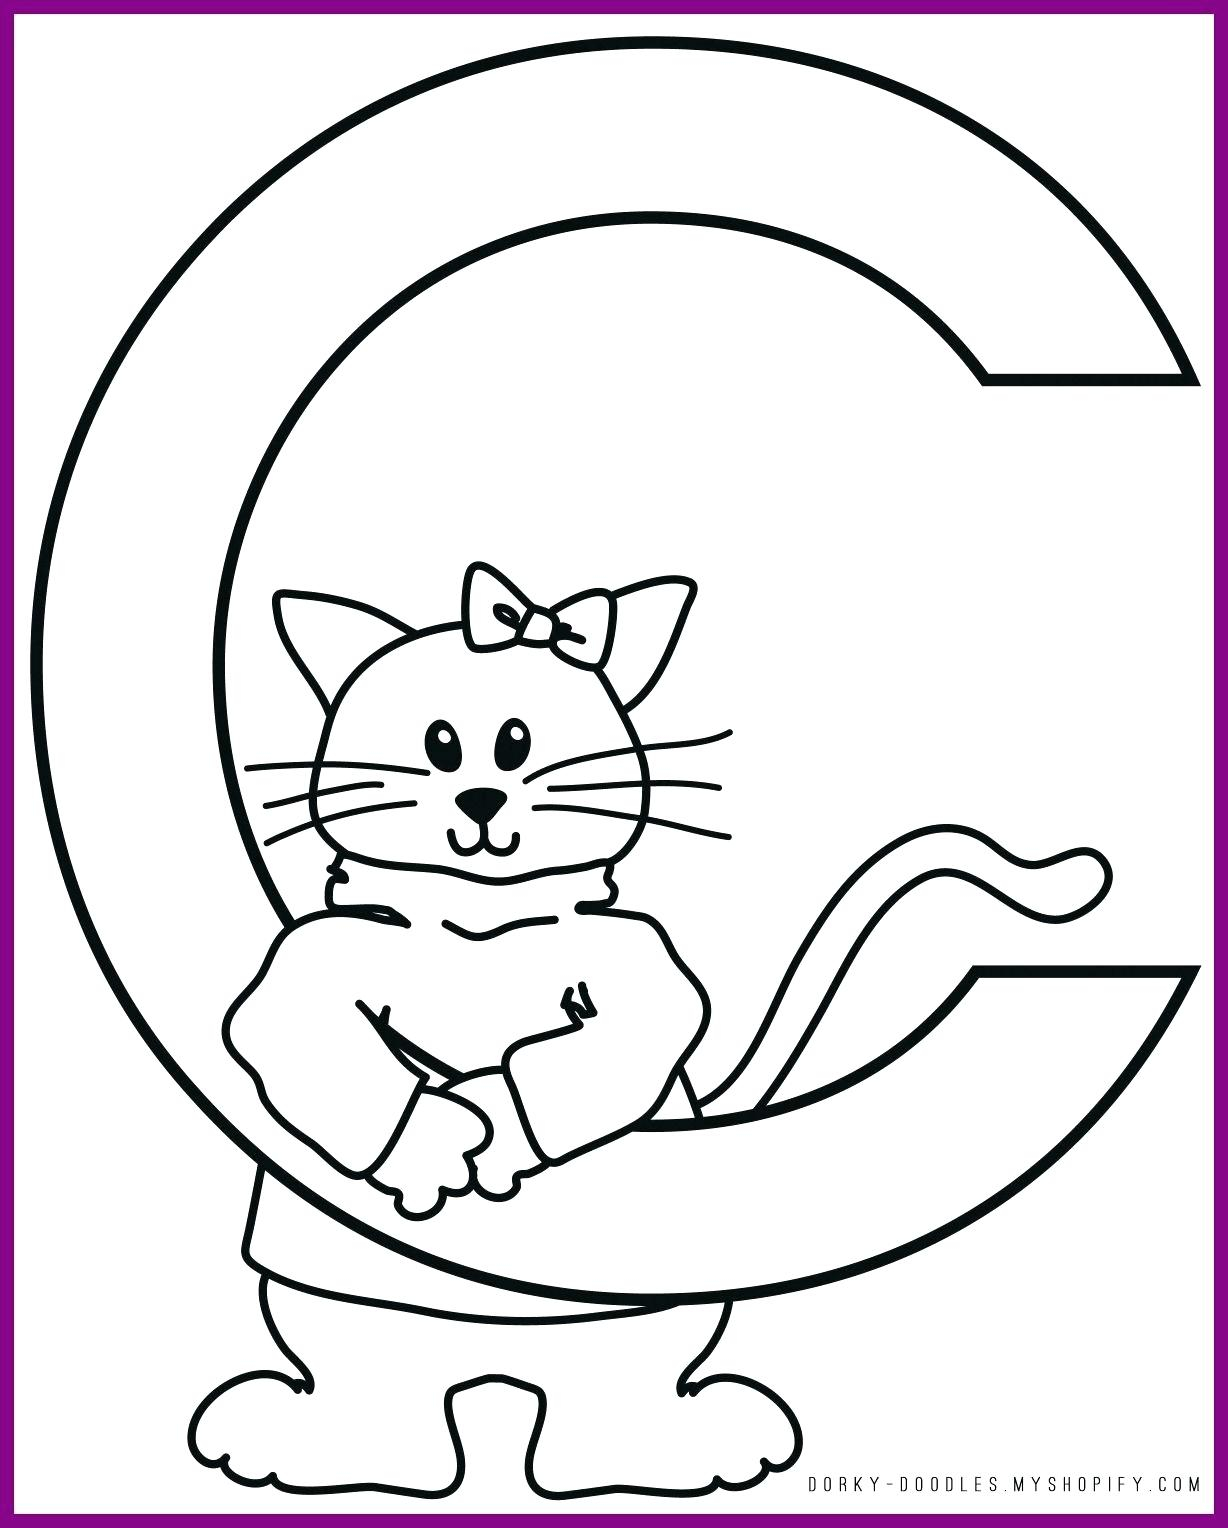 Letter C Coloring Pages For Preschoolers Preschool Letter C Coloring Pages Letter C Coloring Pages Printable